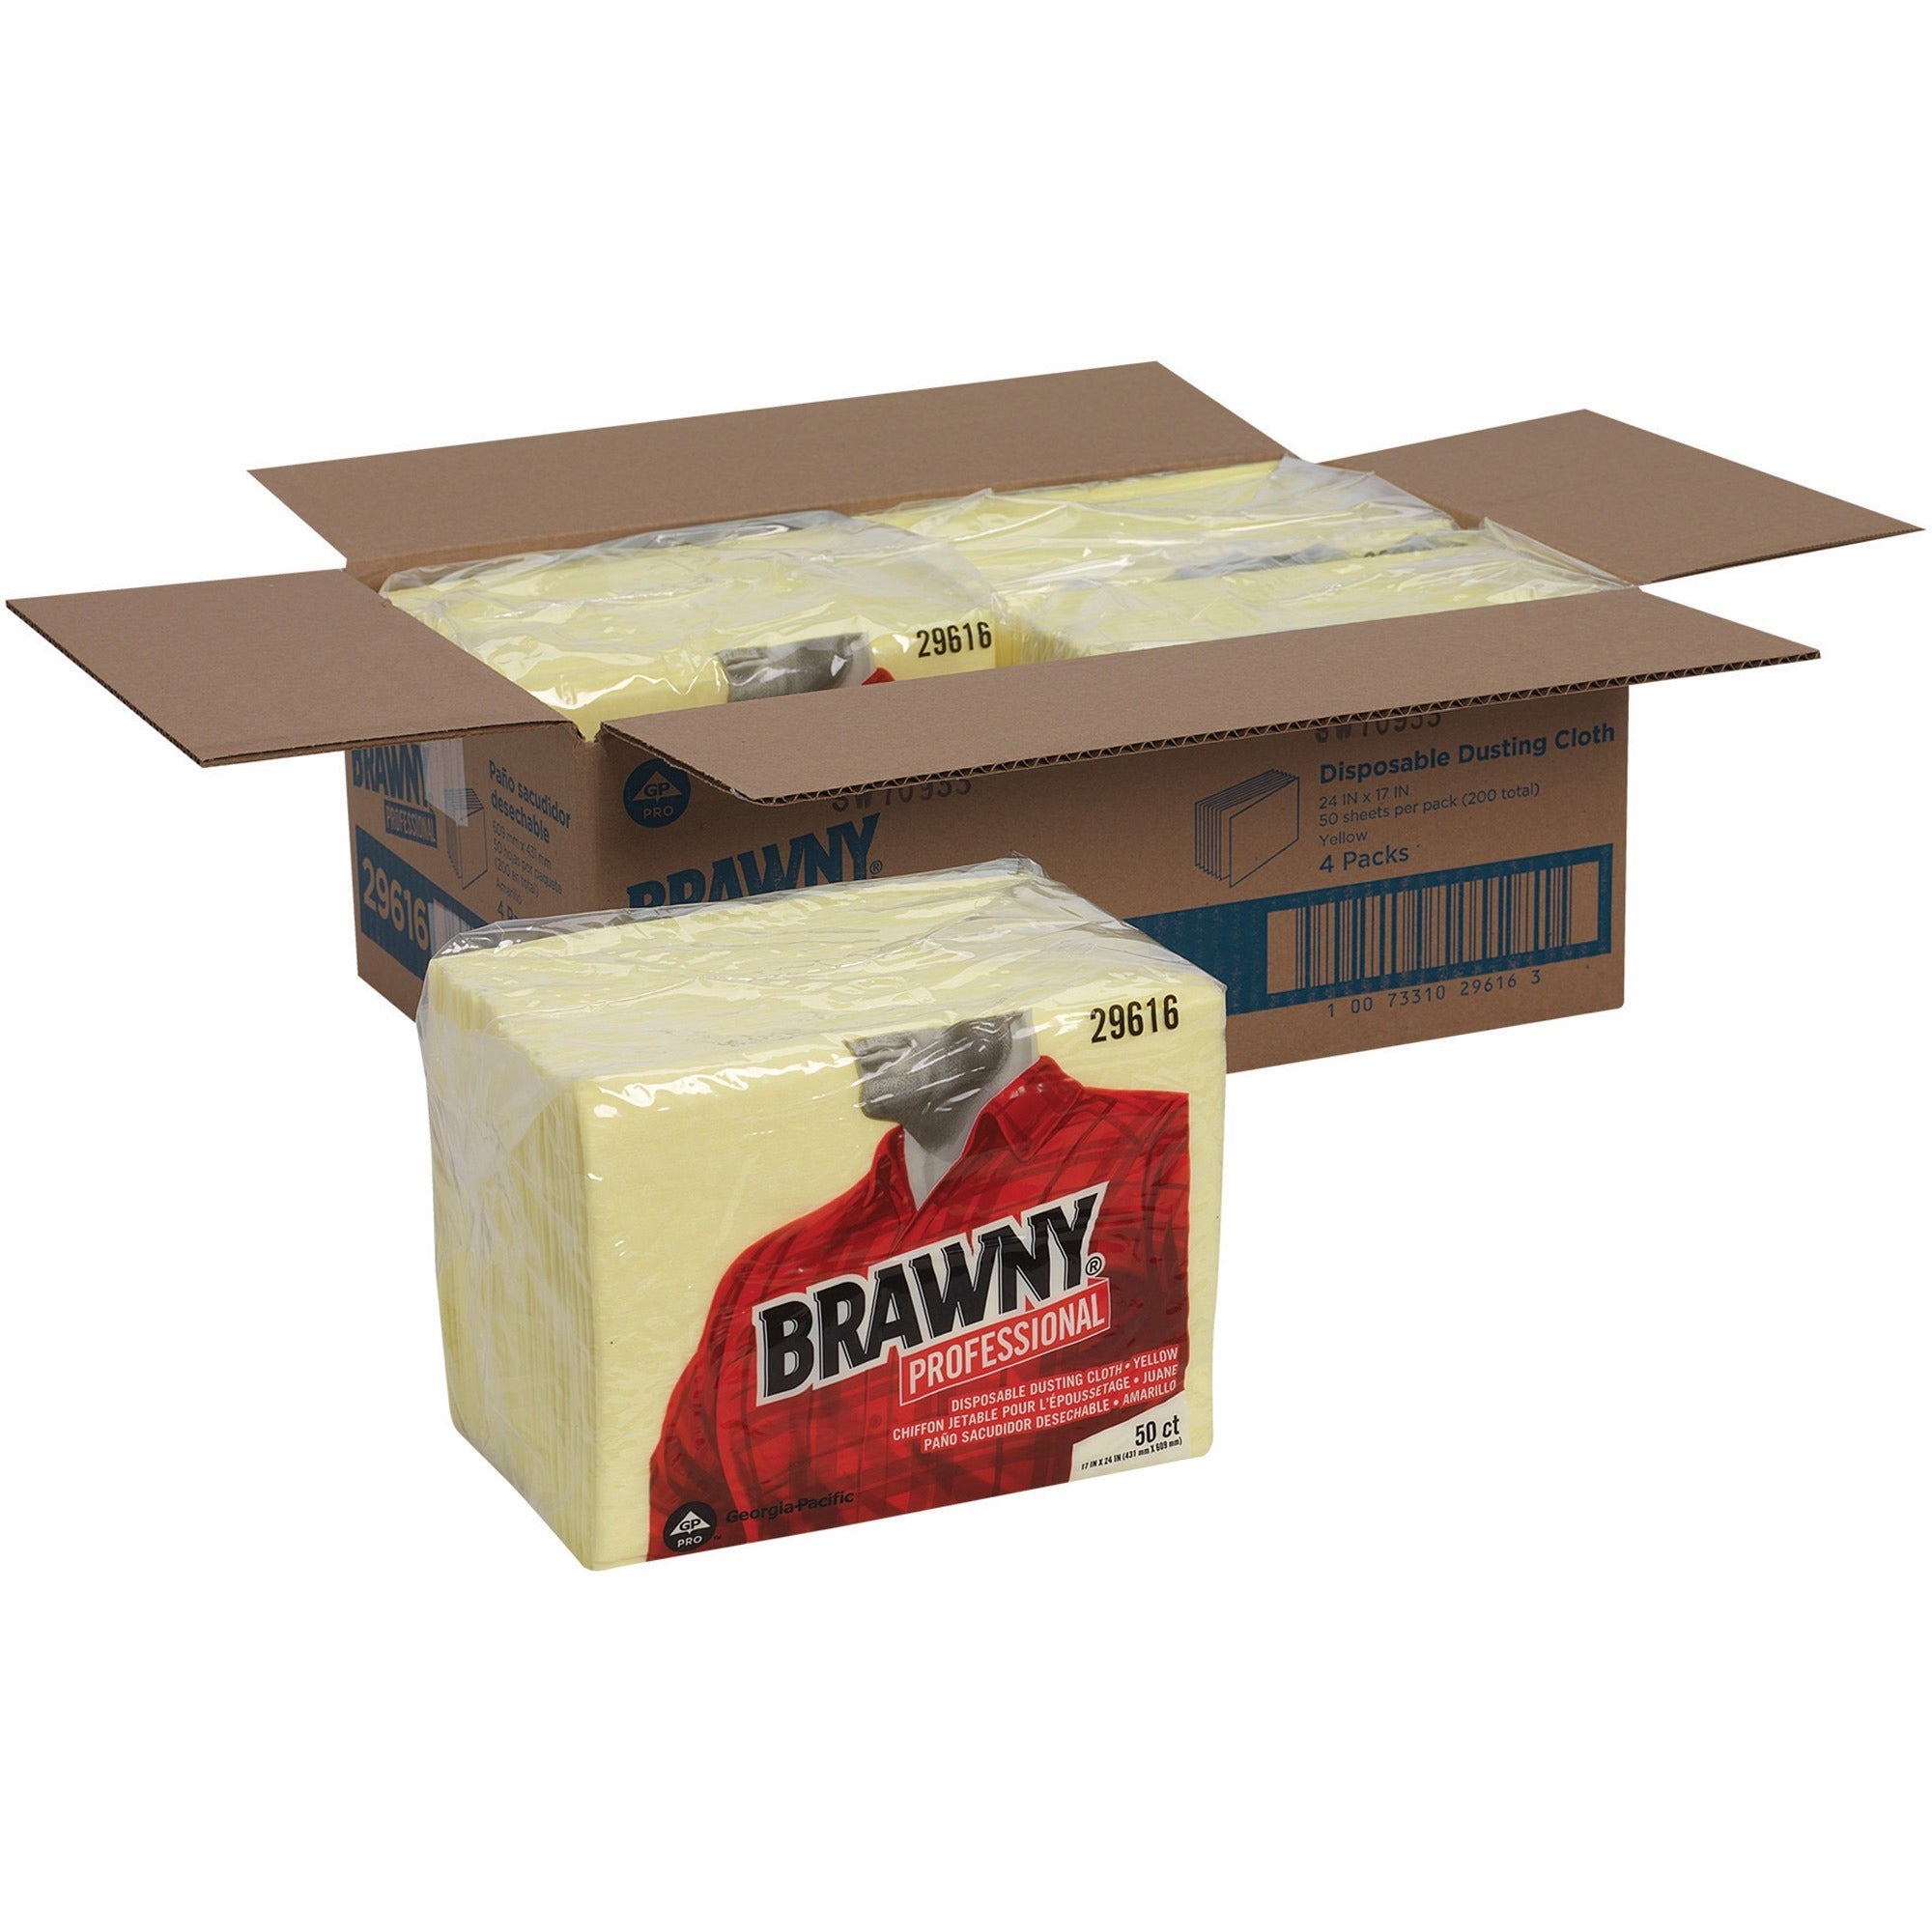 brawny-professional-disposable-dusting-cloths-24-length-x-17-width-50-pack-4-carton-moisture-resistant-soft-strong-yellow_gpc29616ct - 1